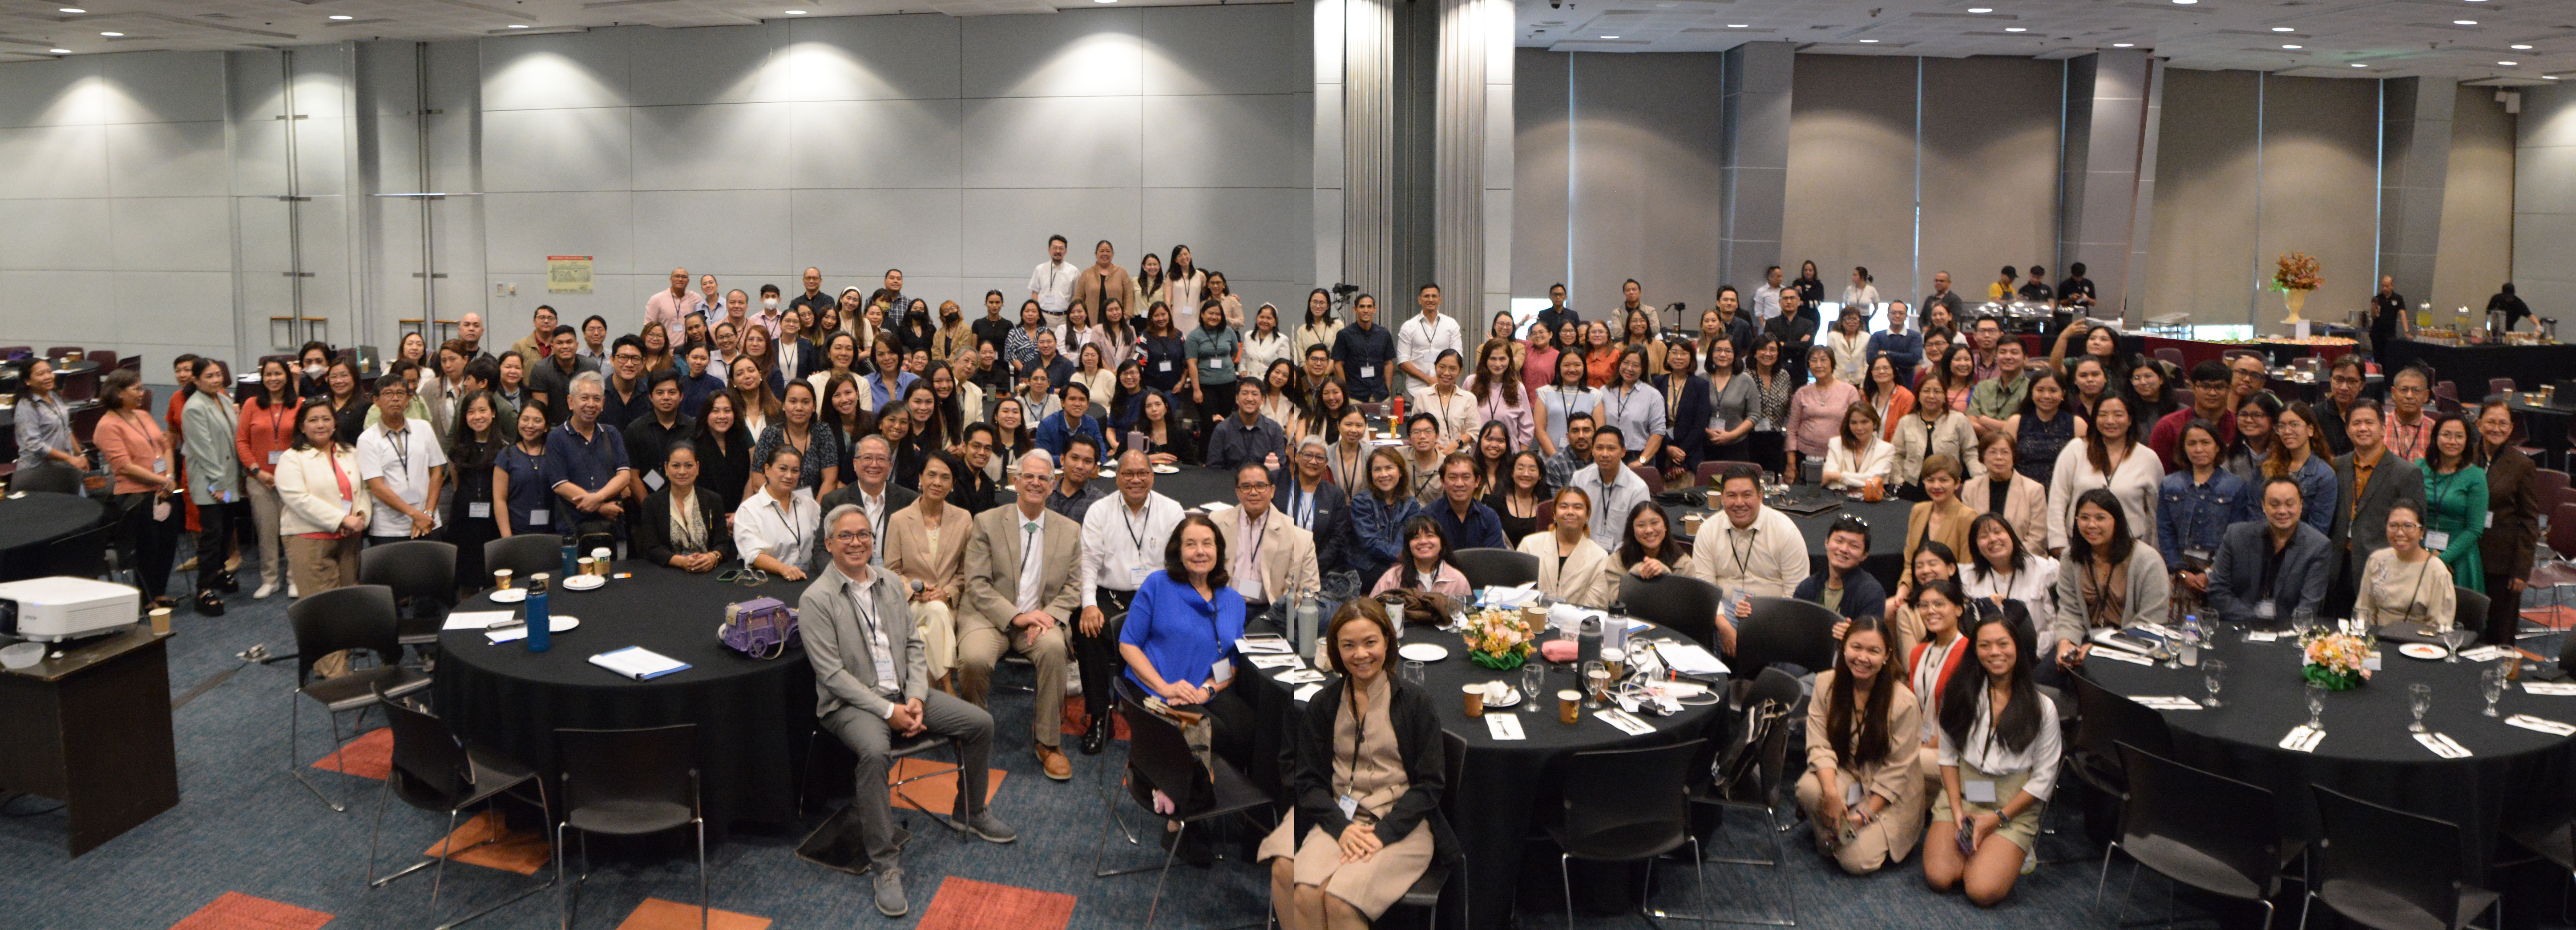 Image for Ateneo School of Medicine and Public Health Hosts Inaugural Asian Functional Medicine Conference